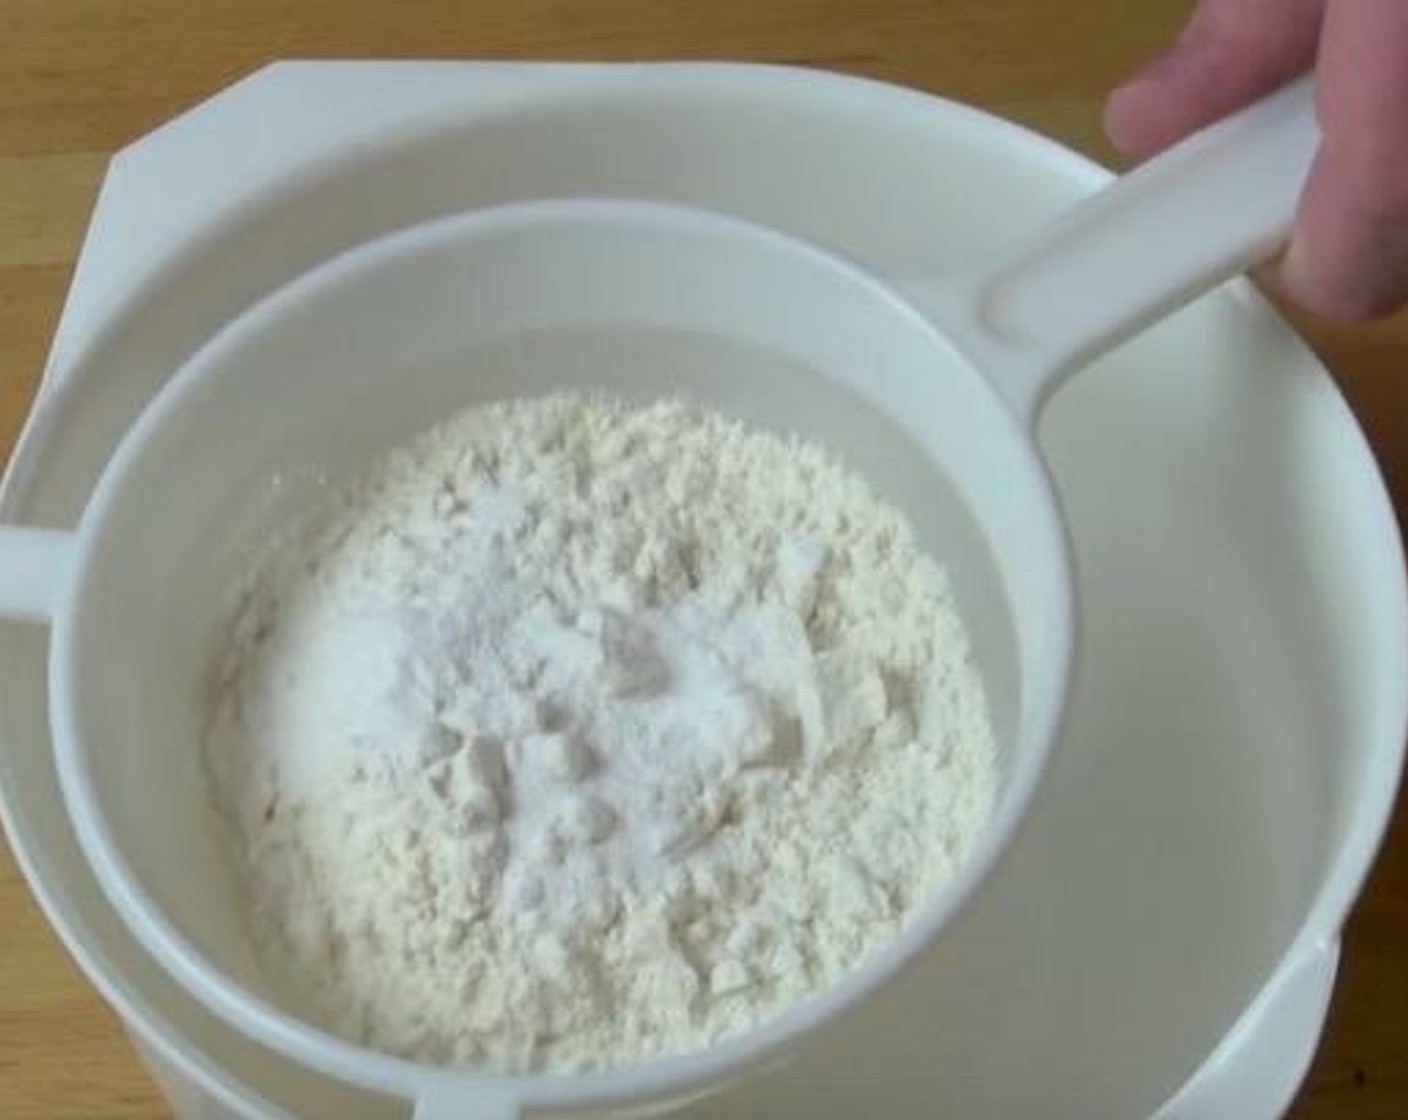 step 2 Sift it together for two or three times just to make sure the baking powder is completely incorporated into the flour and there are no lumps. Store the self raising flour in a clean container until the next time you need it.